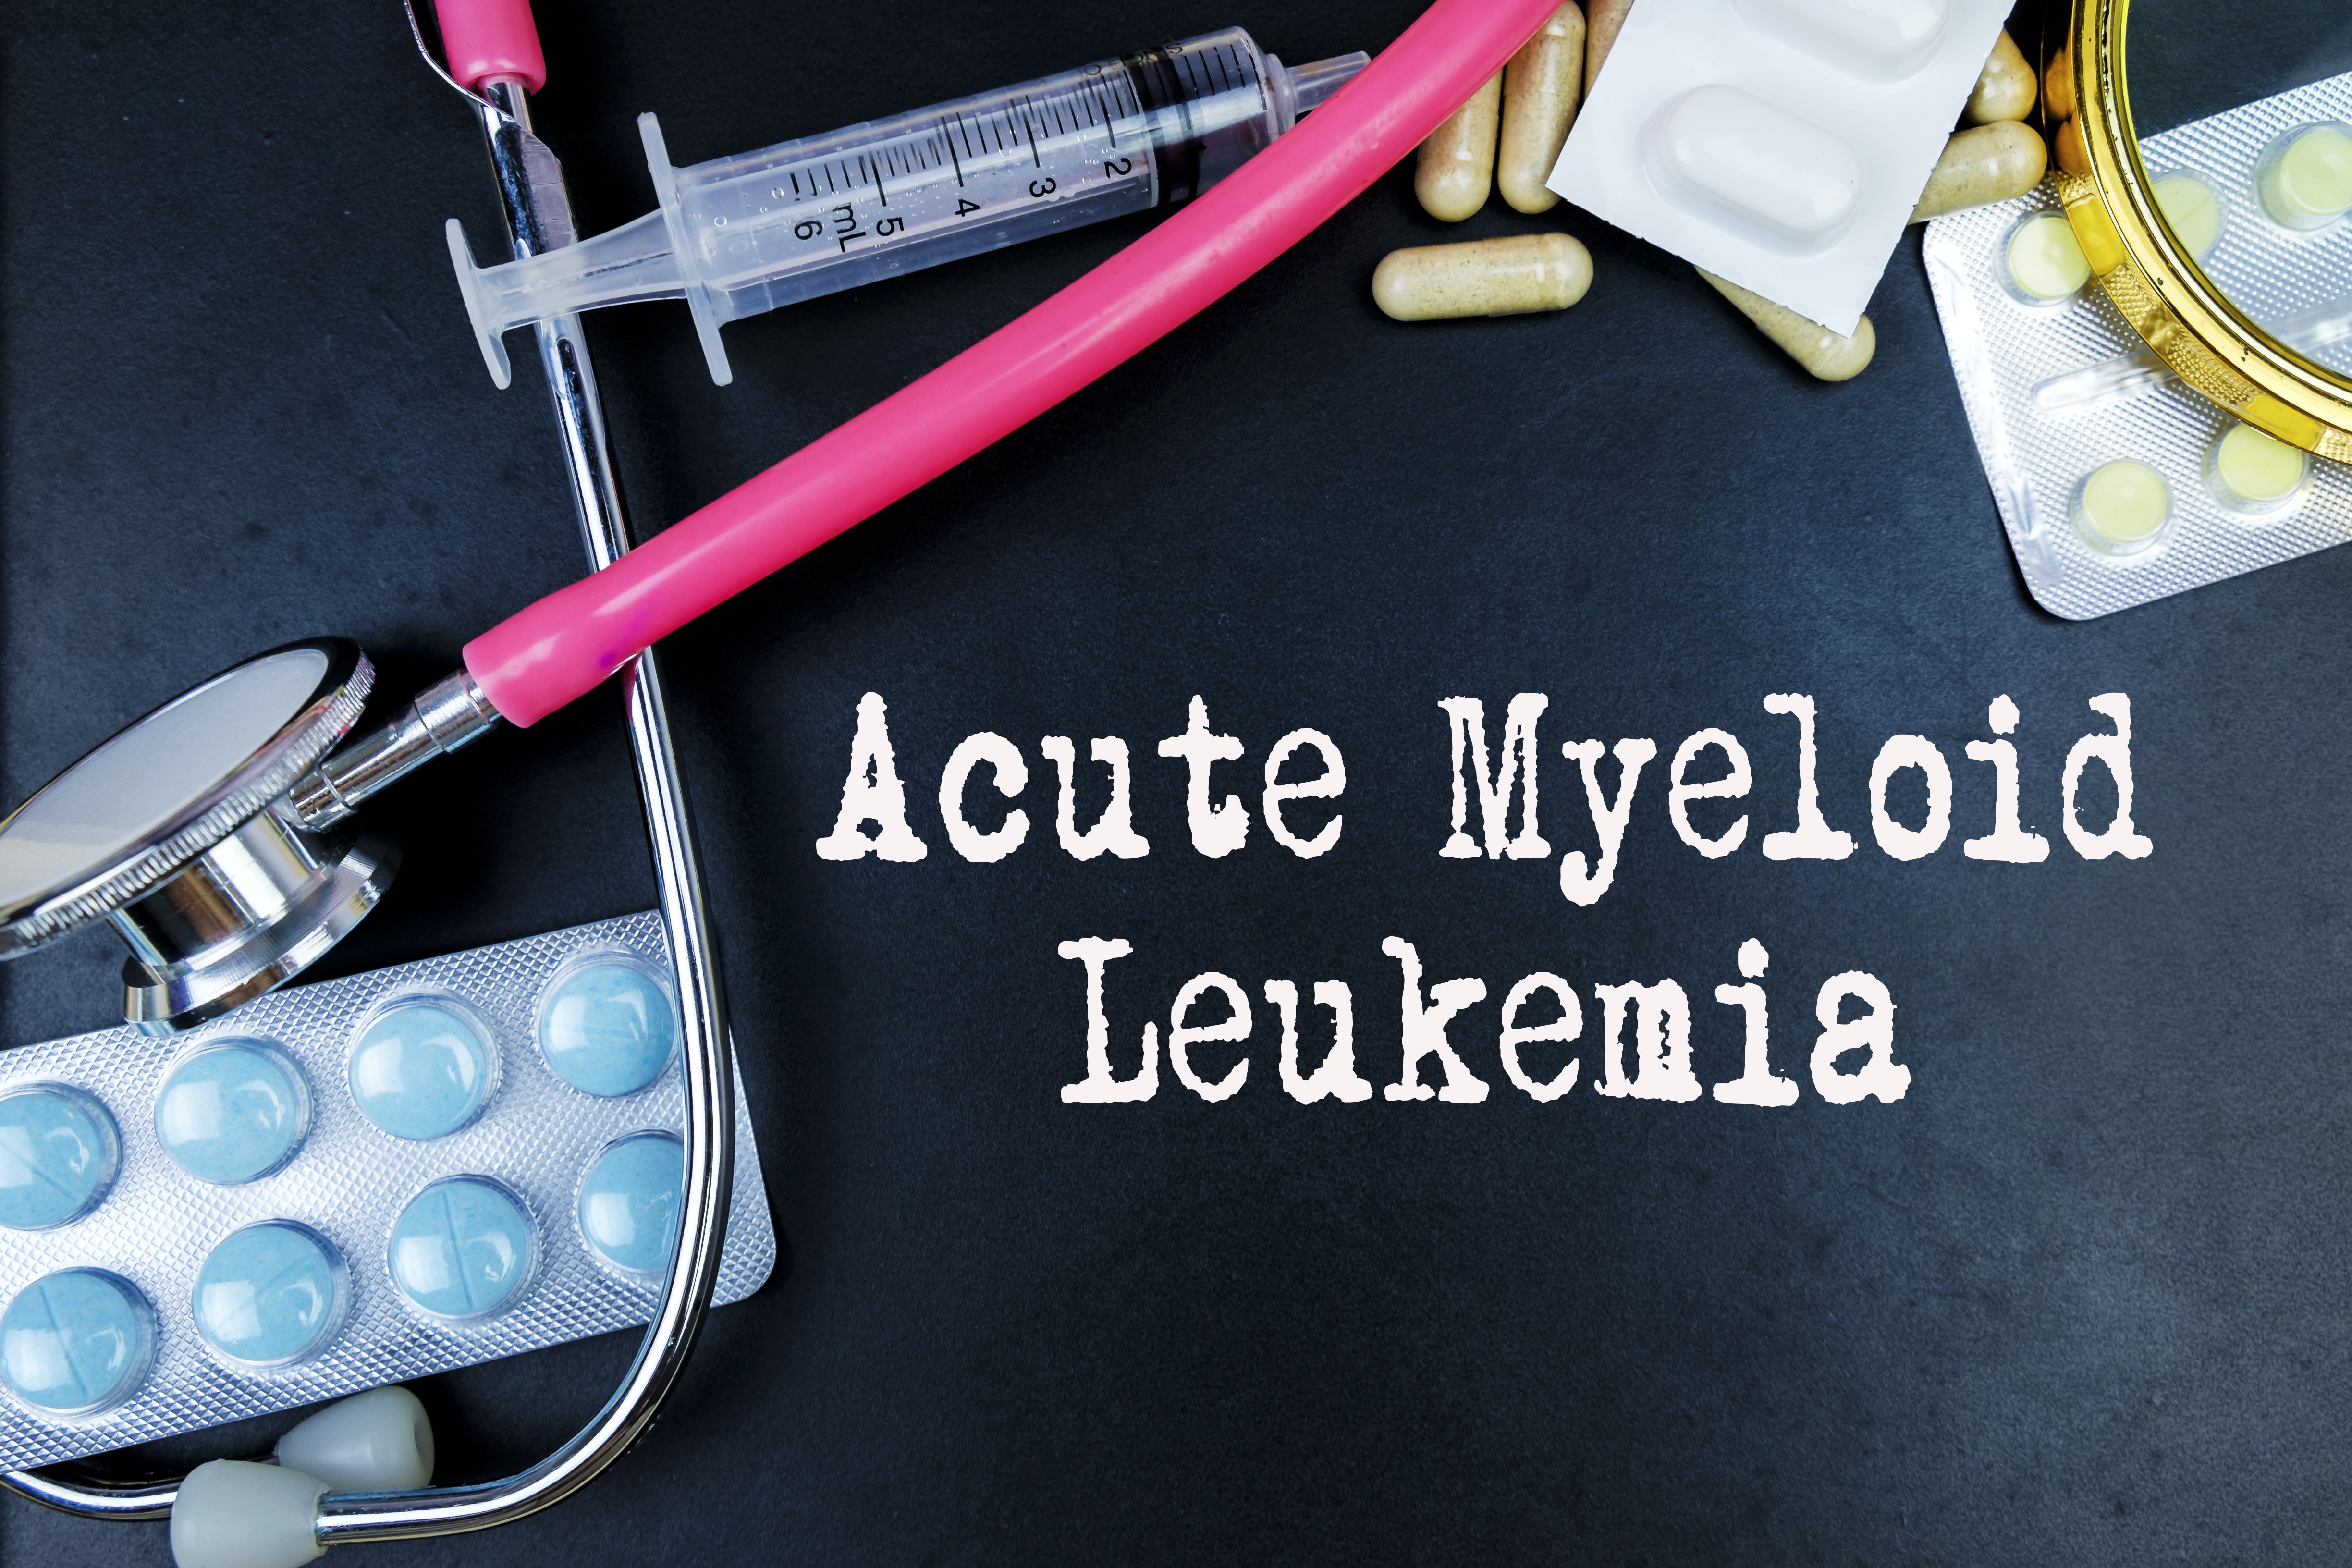 -	A better knowledge of the metabolic profile of the acute myeloide leukemia is determining for opening future options in the design of combined and specific techniques for patients.